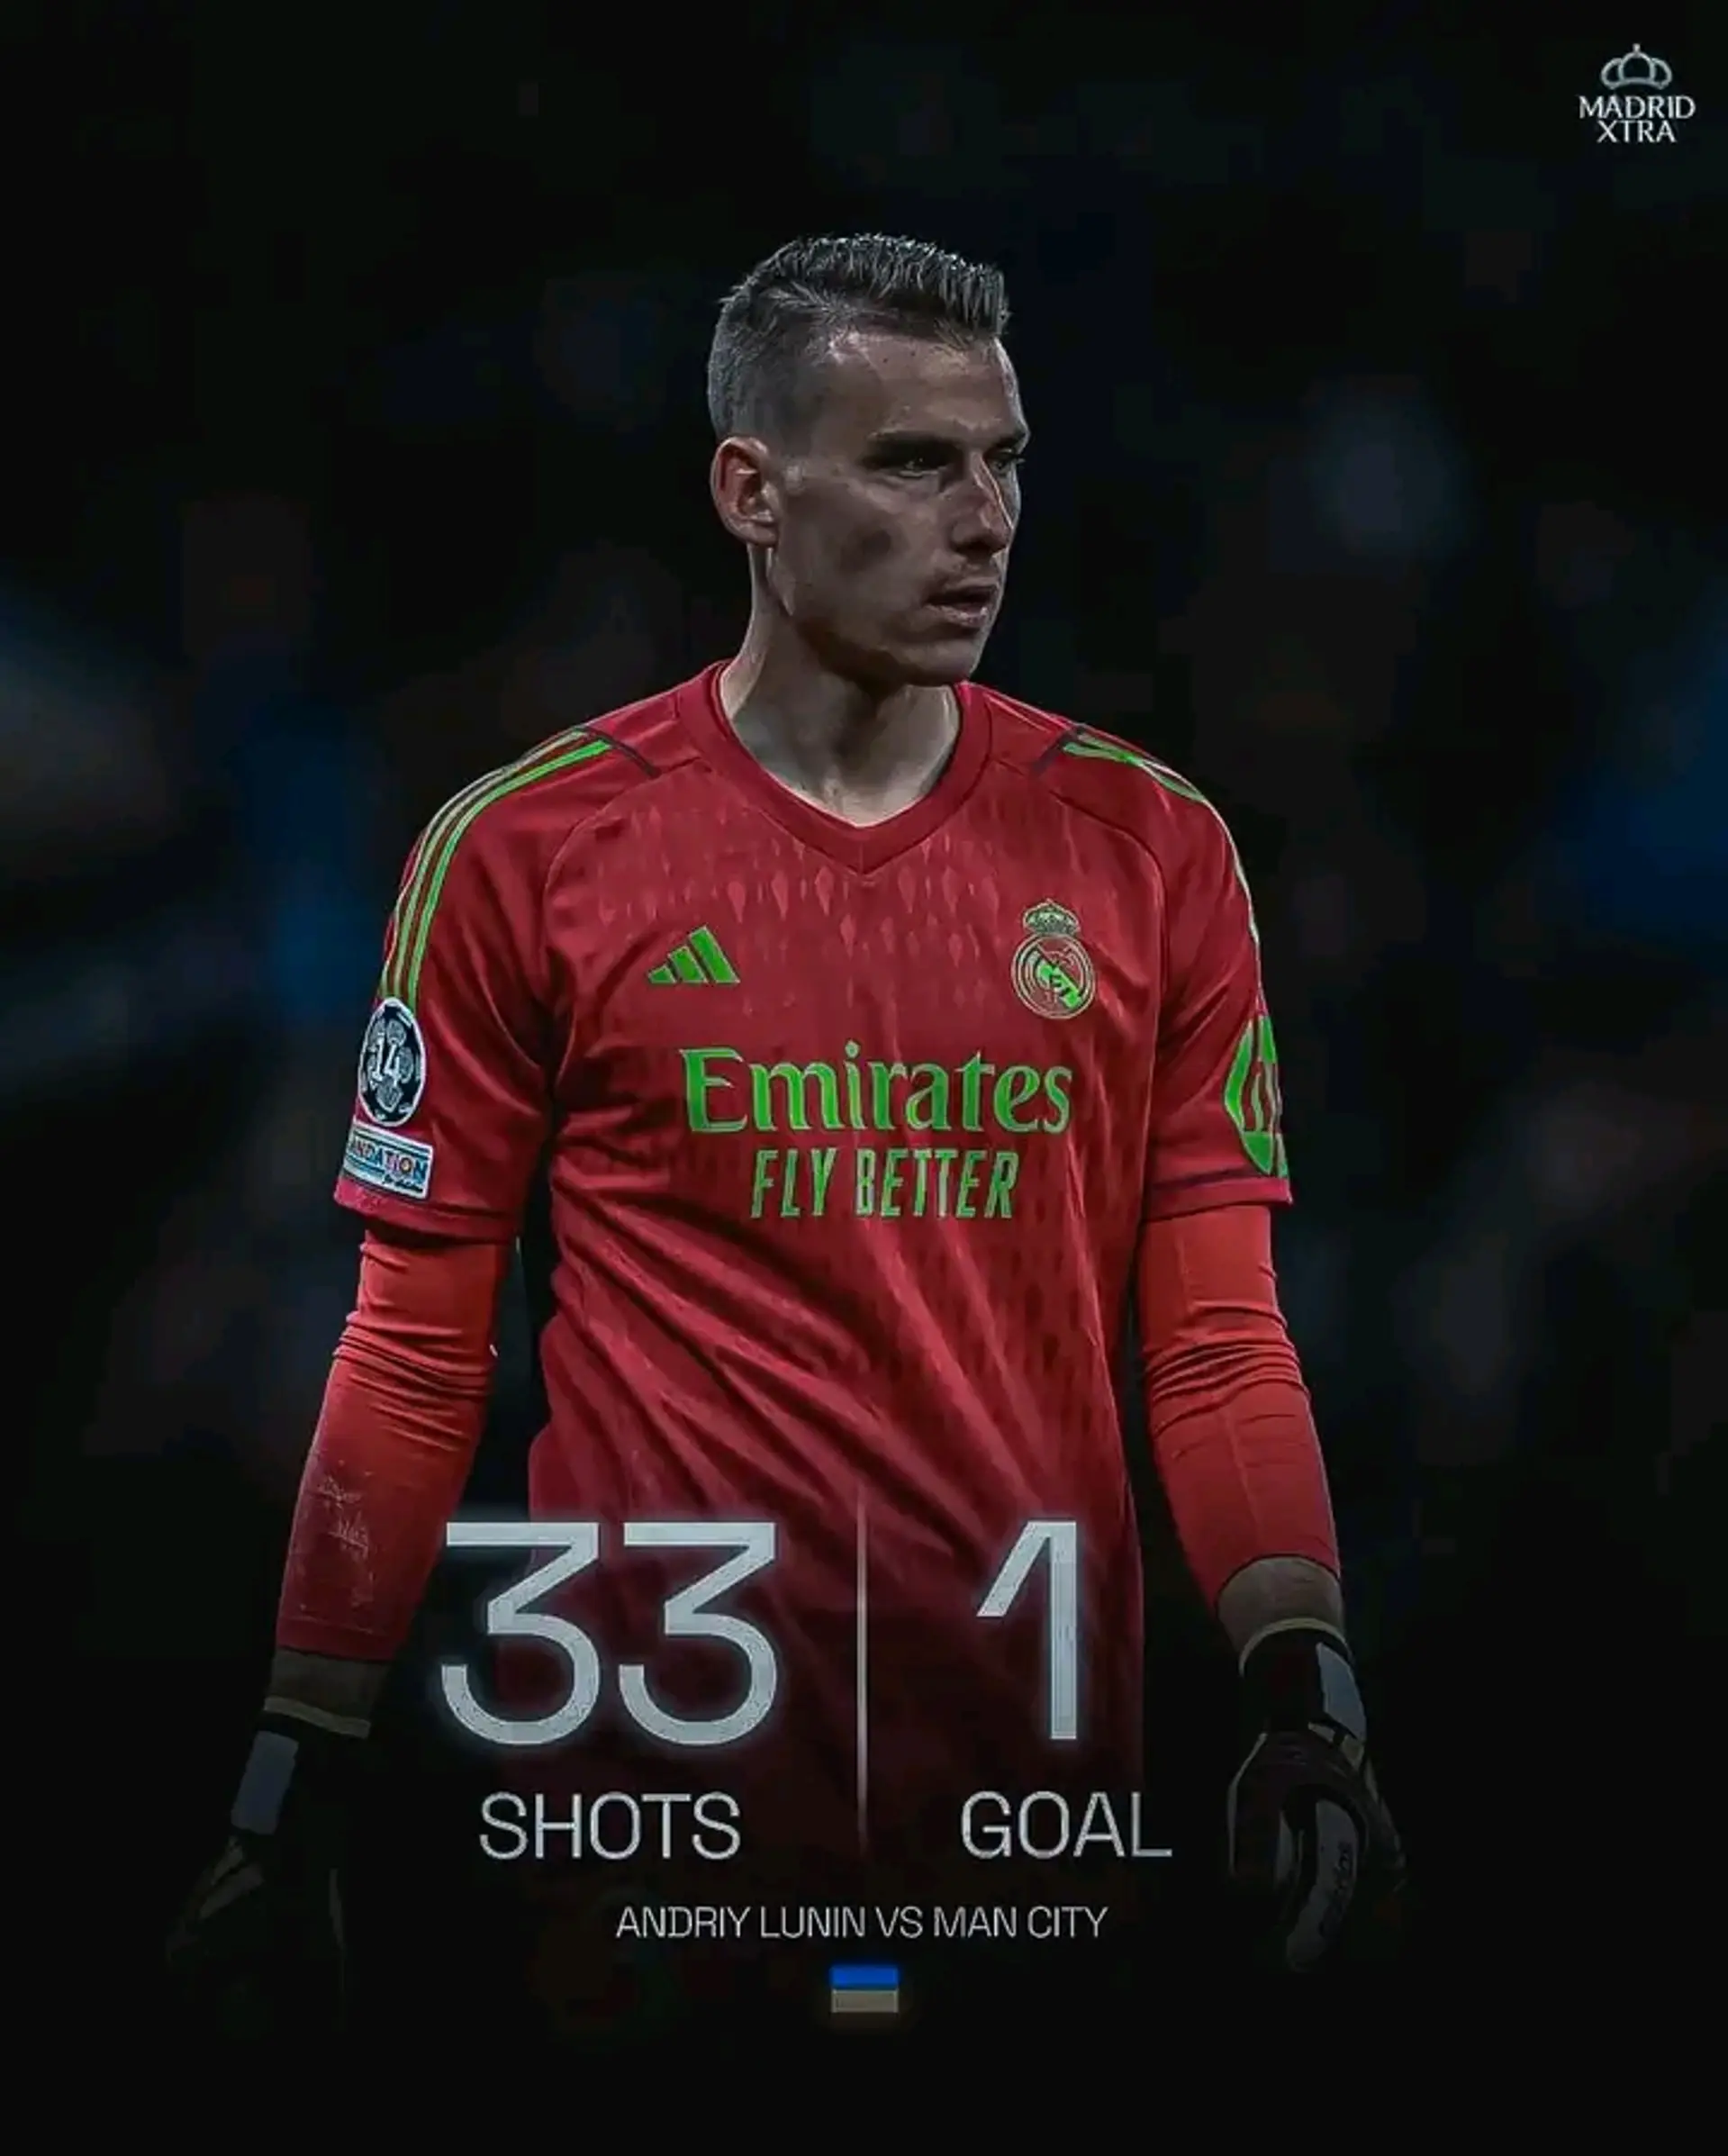 How did you rate lunin in a single mach again city